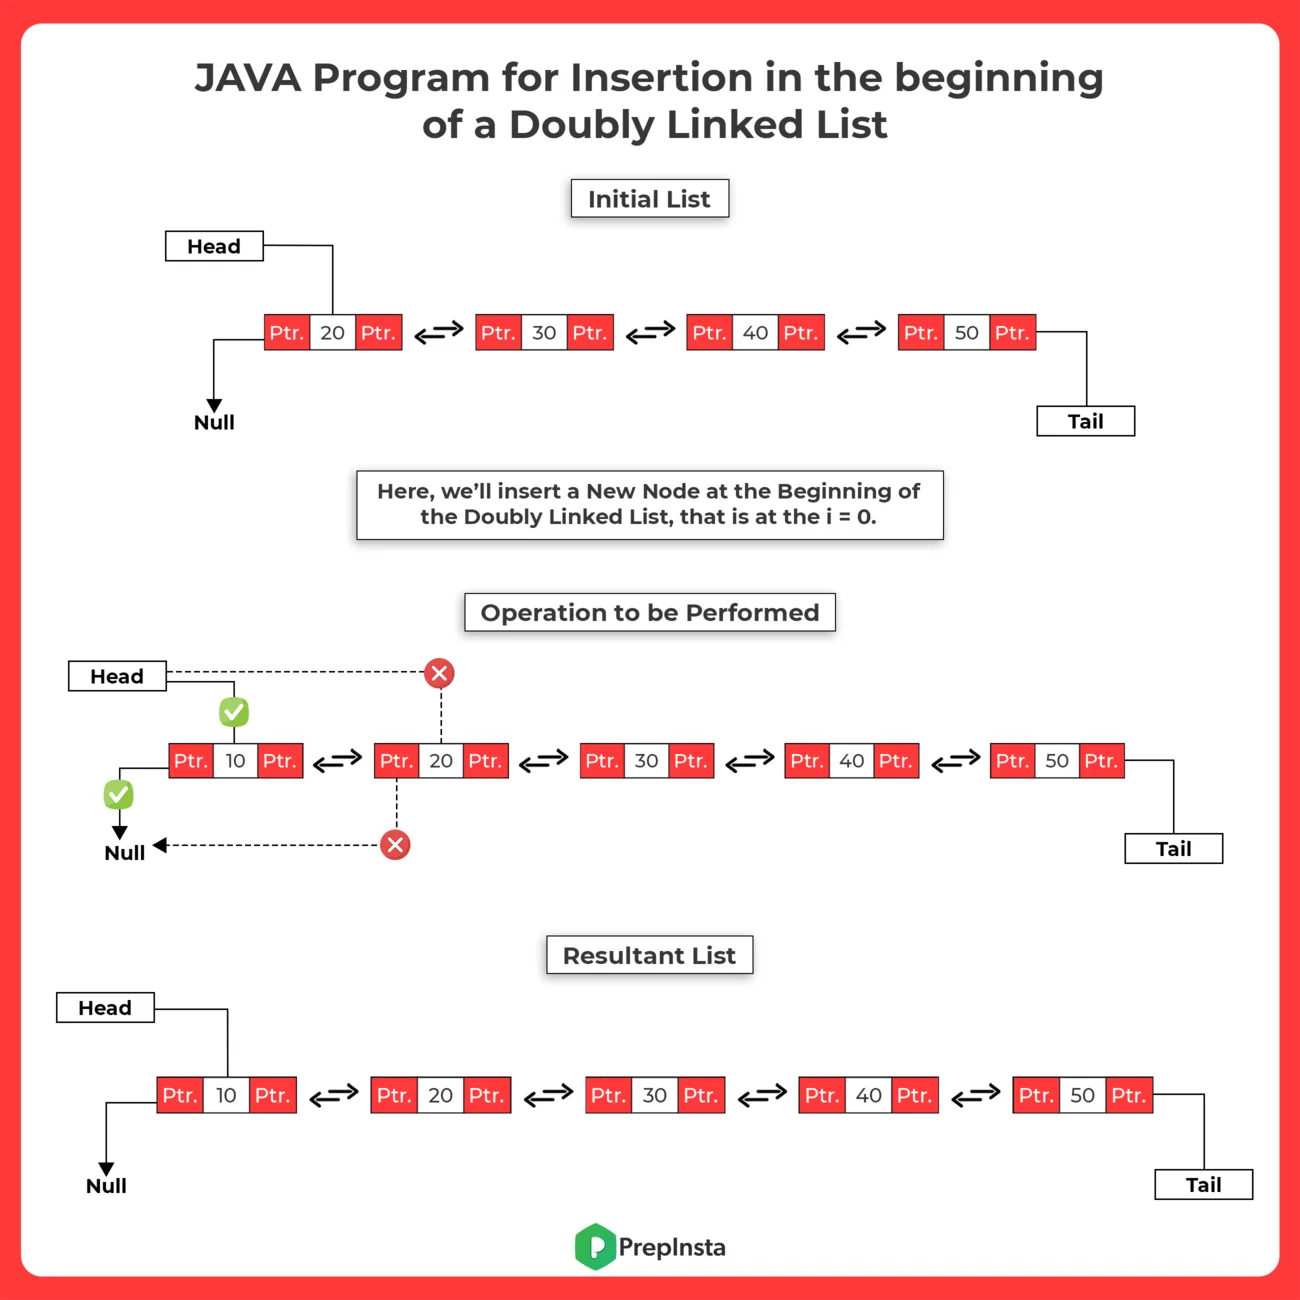 JAVA Program for Insertion at Beginning in a Doubly Linked List